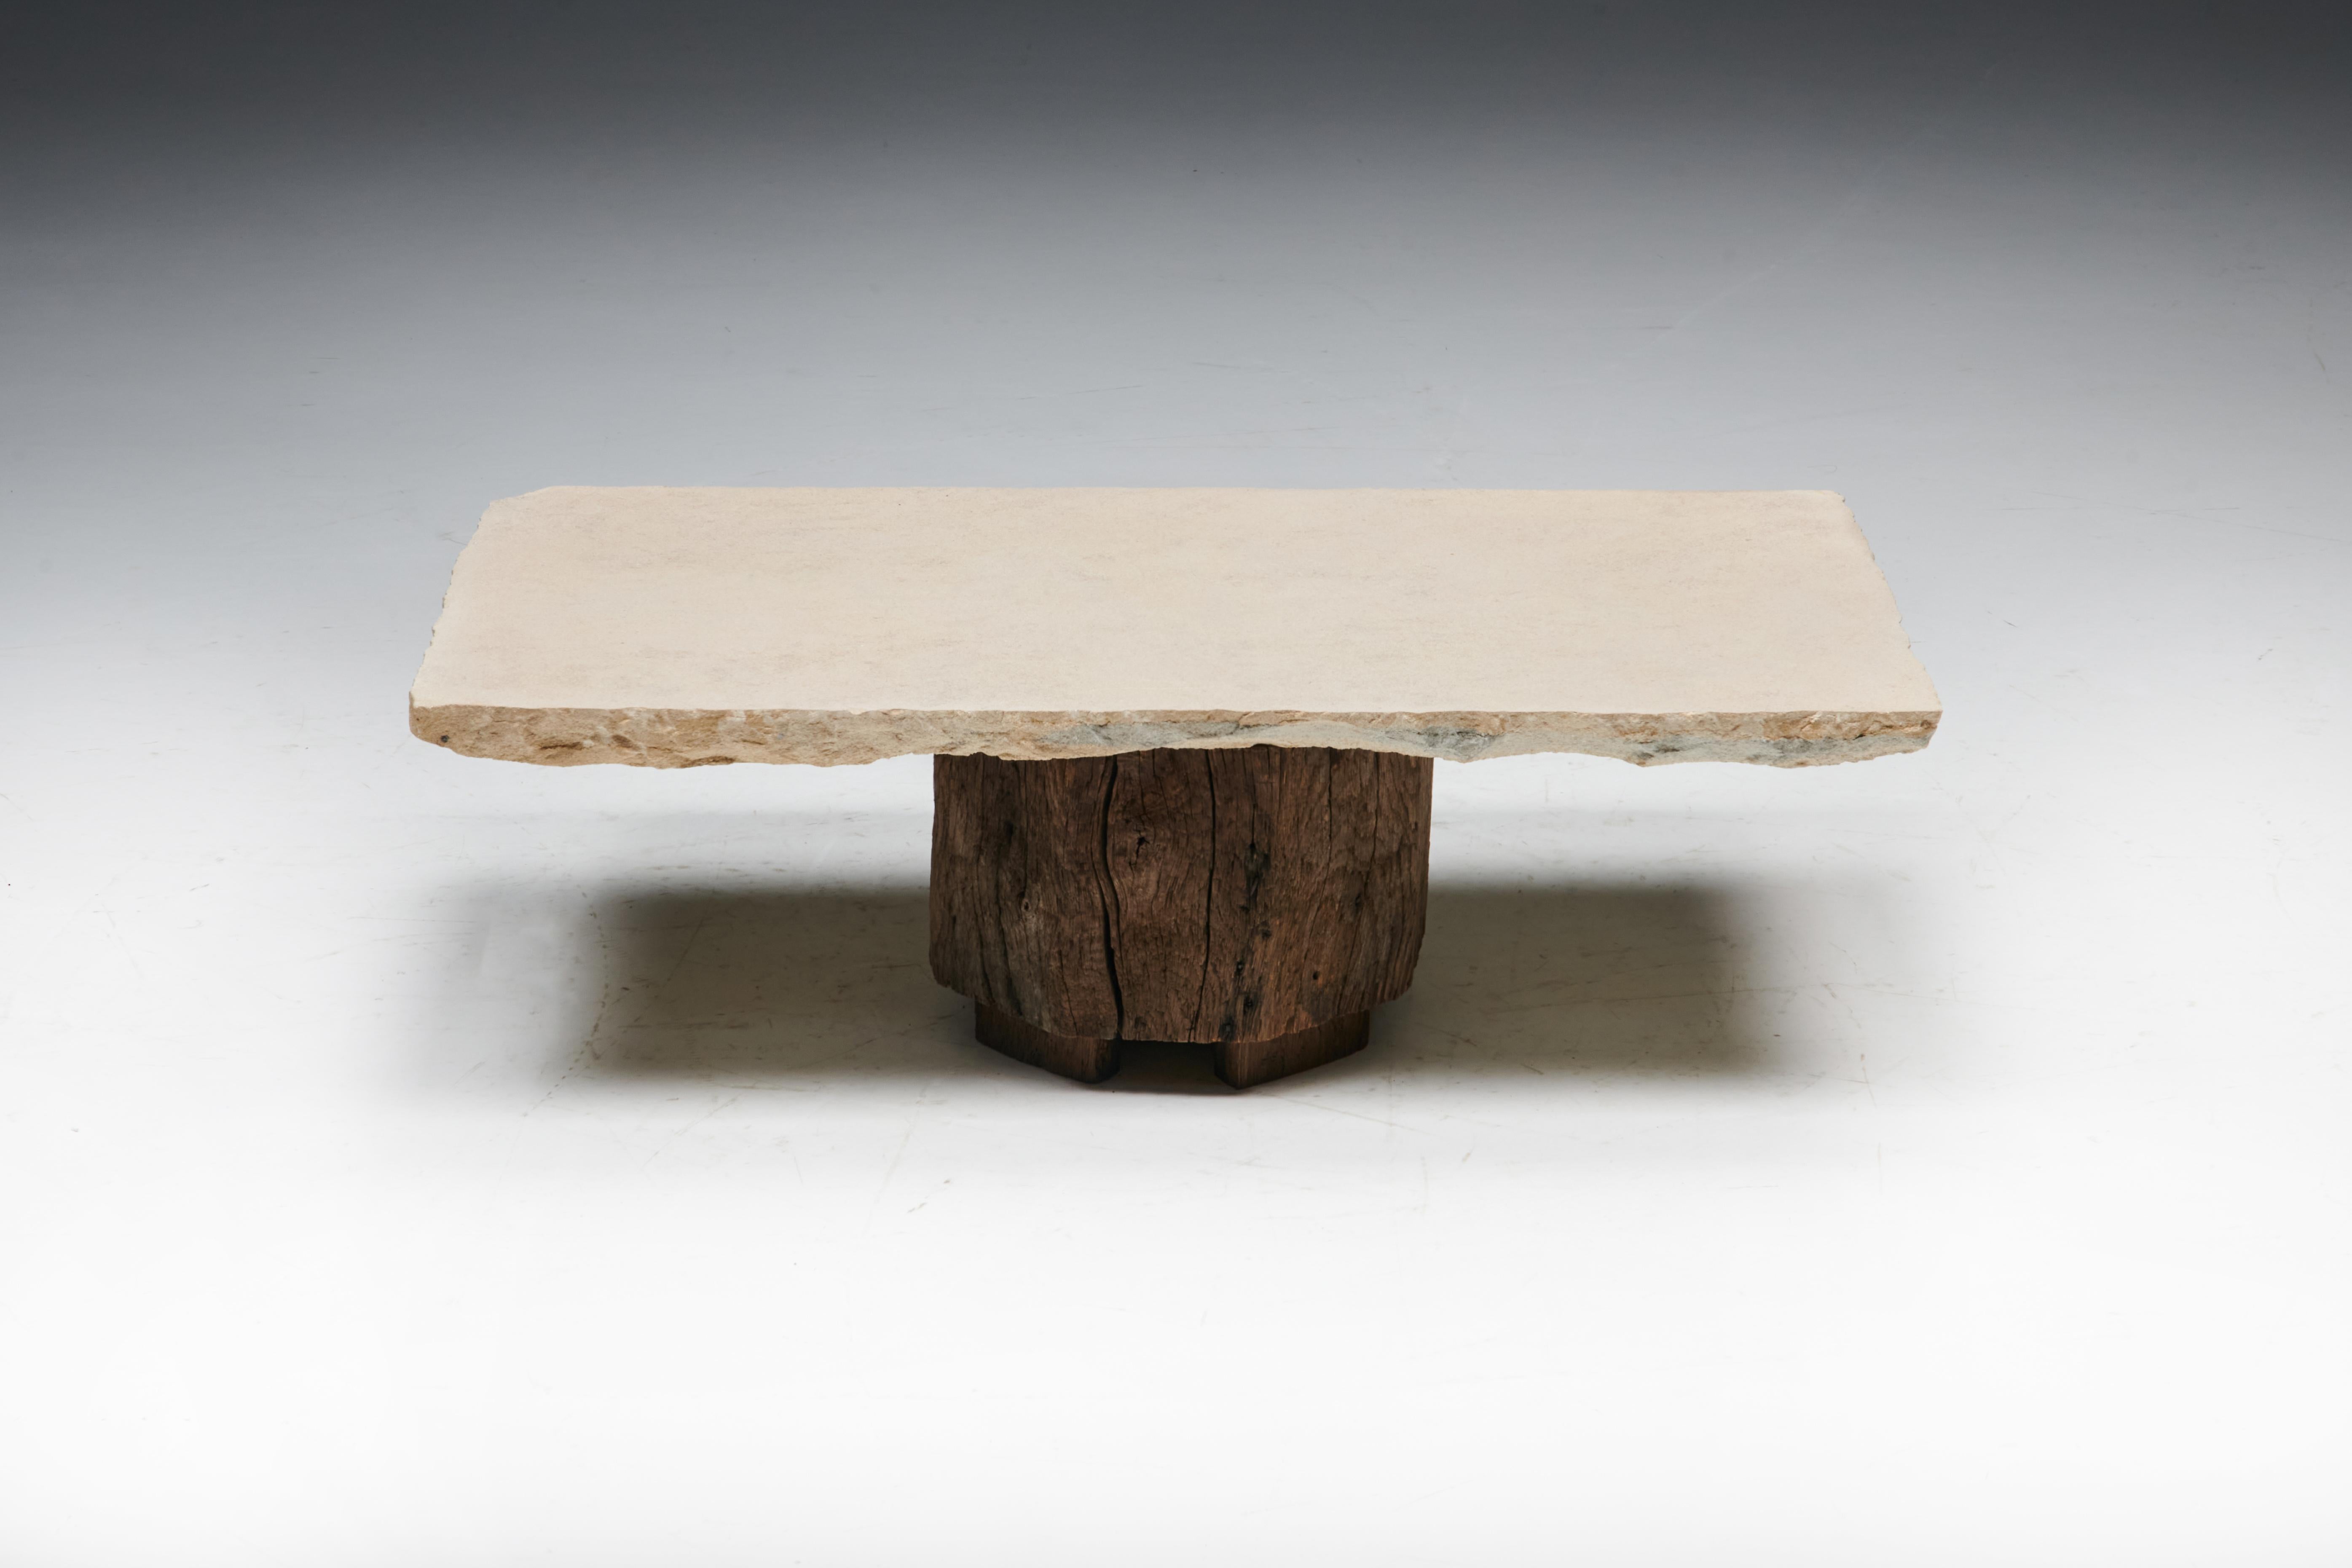 This unique rustic folk art coffee table is handcrafted from a solid tree trunk and finished with exquisite slate as a tabletop, seamlessly blending natural beauty with functional design. We have matching side tables and storage pieces available in